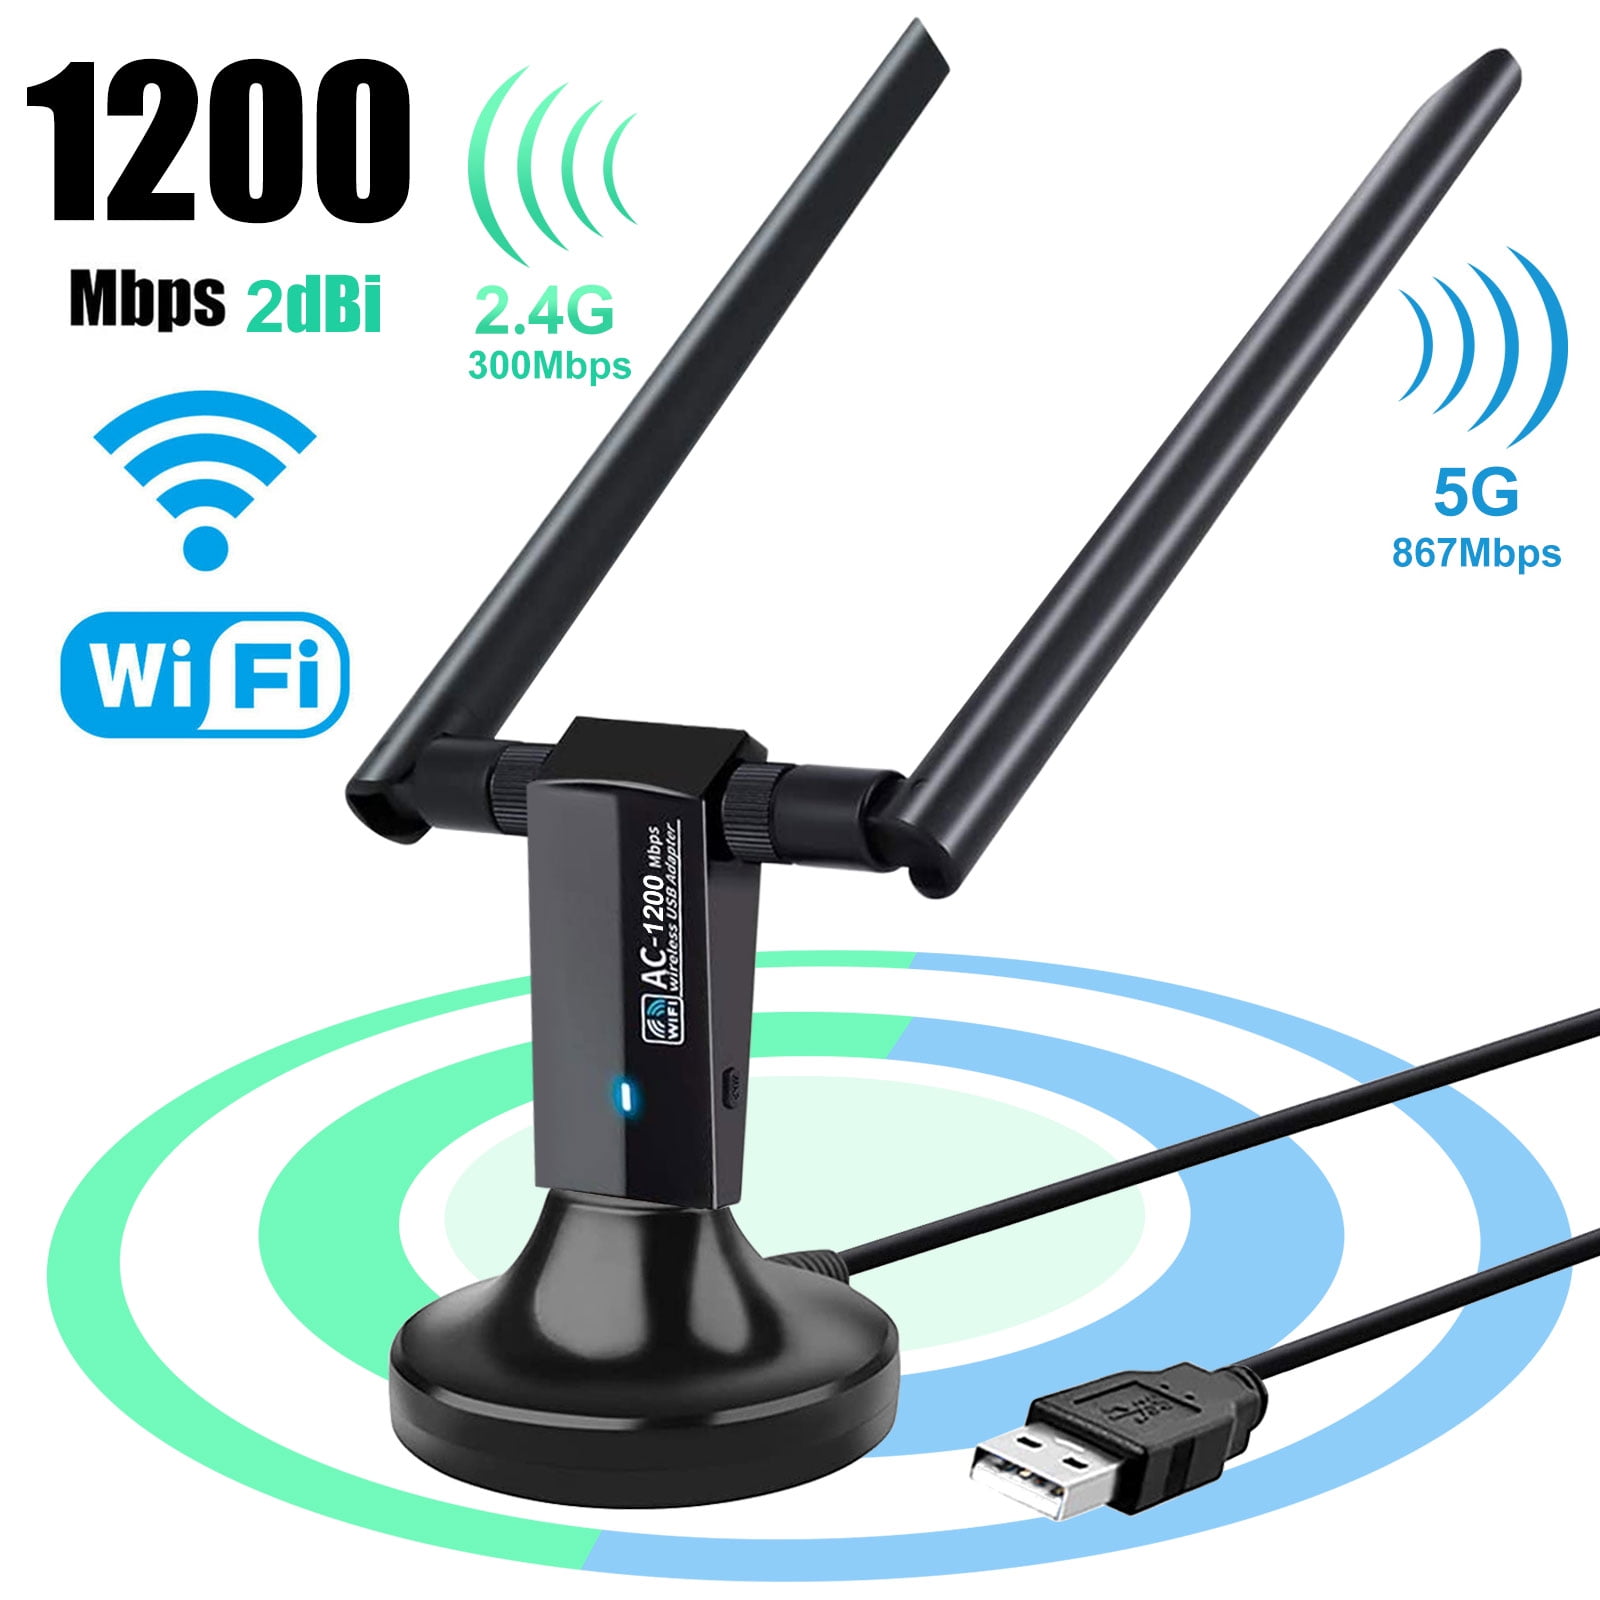 Fellow Burma load 1200Mbps USB WiFi Adapter for Desktop or PC, TSV Dual Band 2.4G/ 5G AC  Wireless Network Card Dongle with 5dBi High Gain Antenna for Desktop Laptop  PC Support Windows 11/10/8/7/XP/Vista, Mac OS -